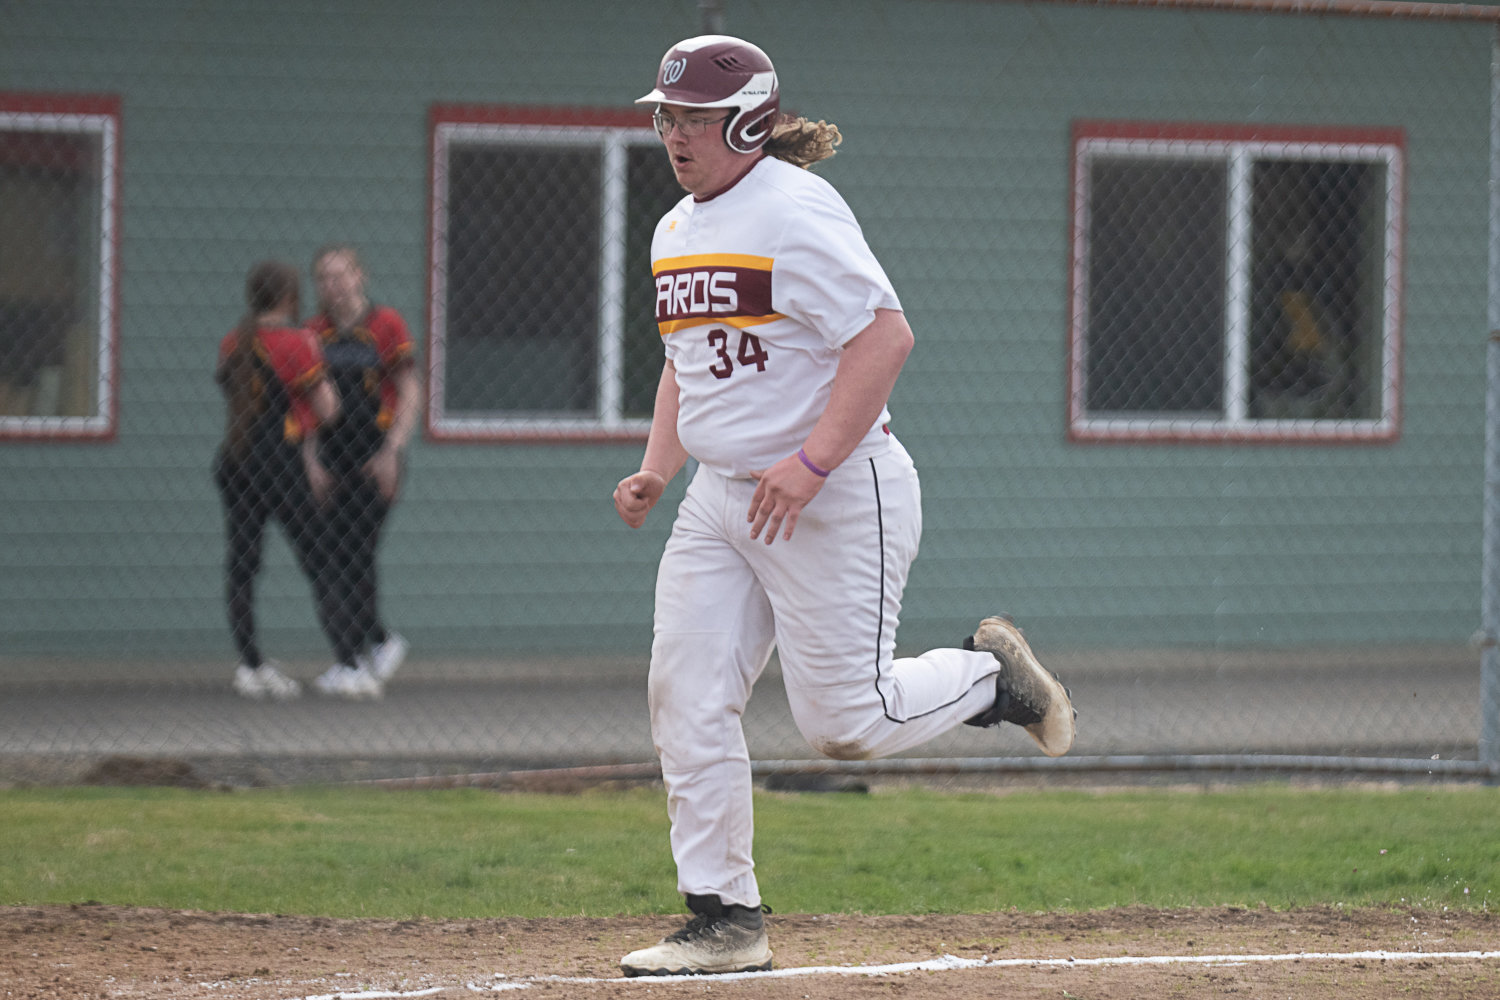 Christian Uhri runs home to score during Winlock's first game of the day against MWP on March 27.